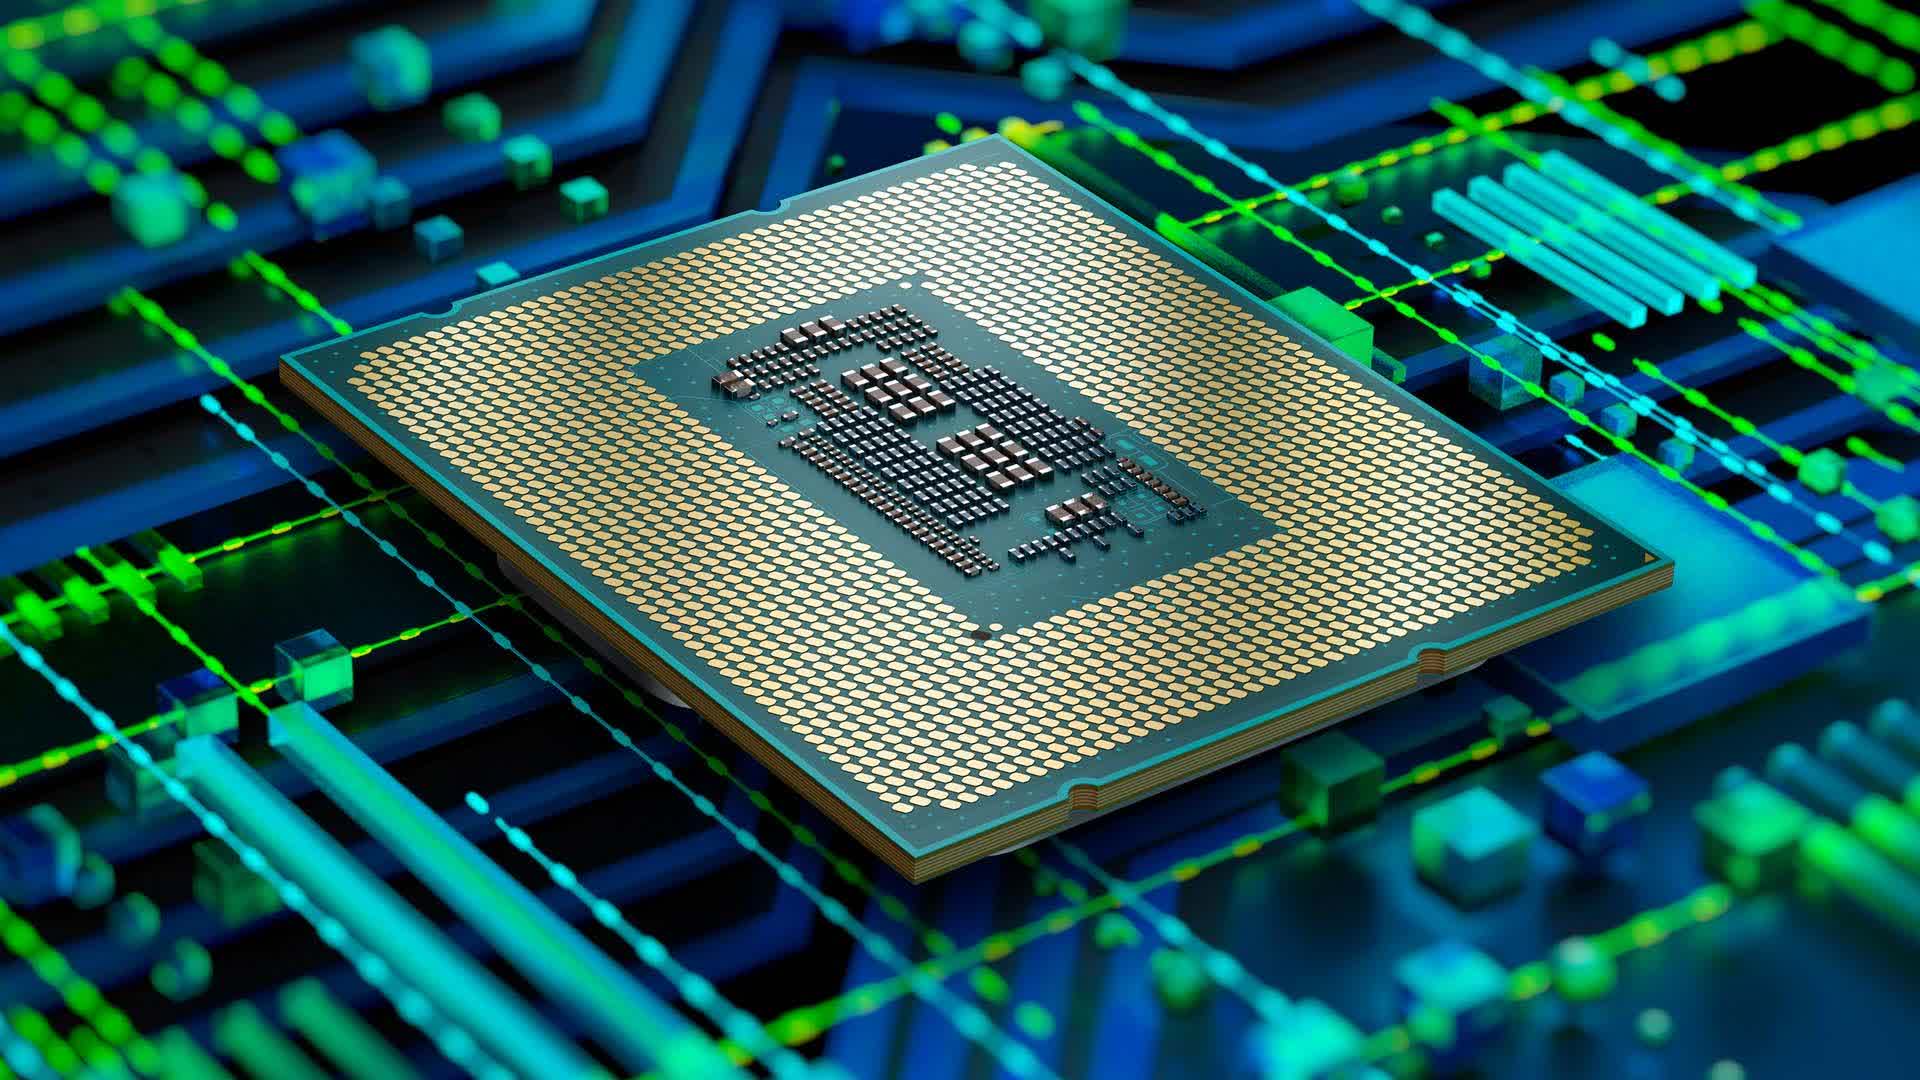 Intel Raptor Lake CPUs possibly launching October 17 with the same architecture as Alder Lake